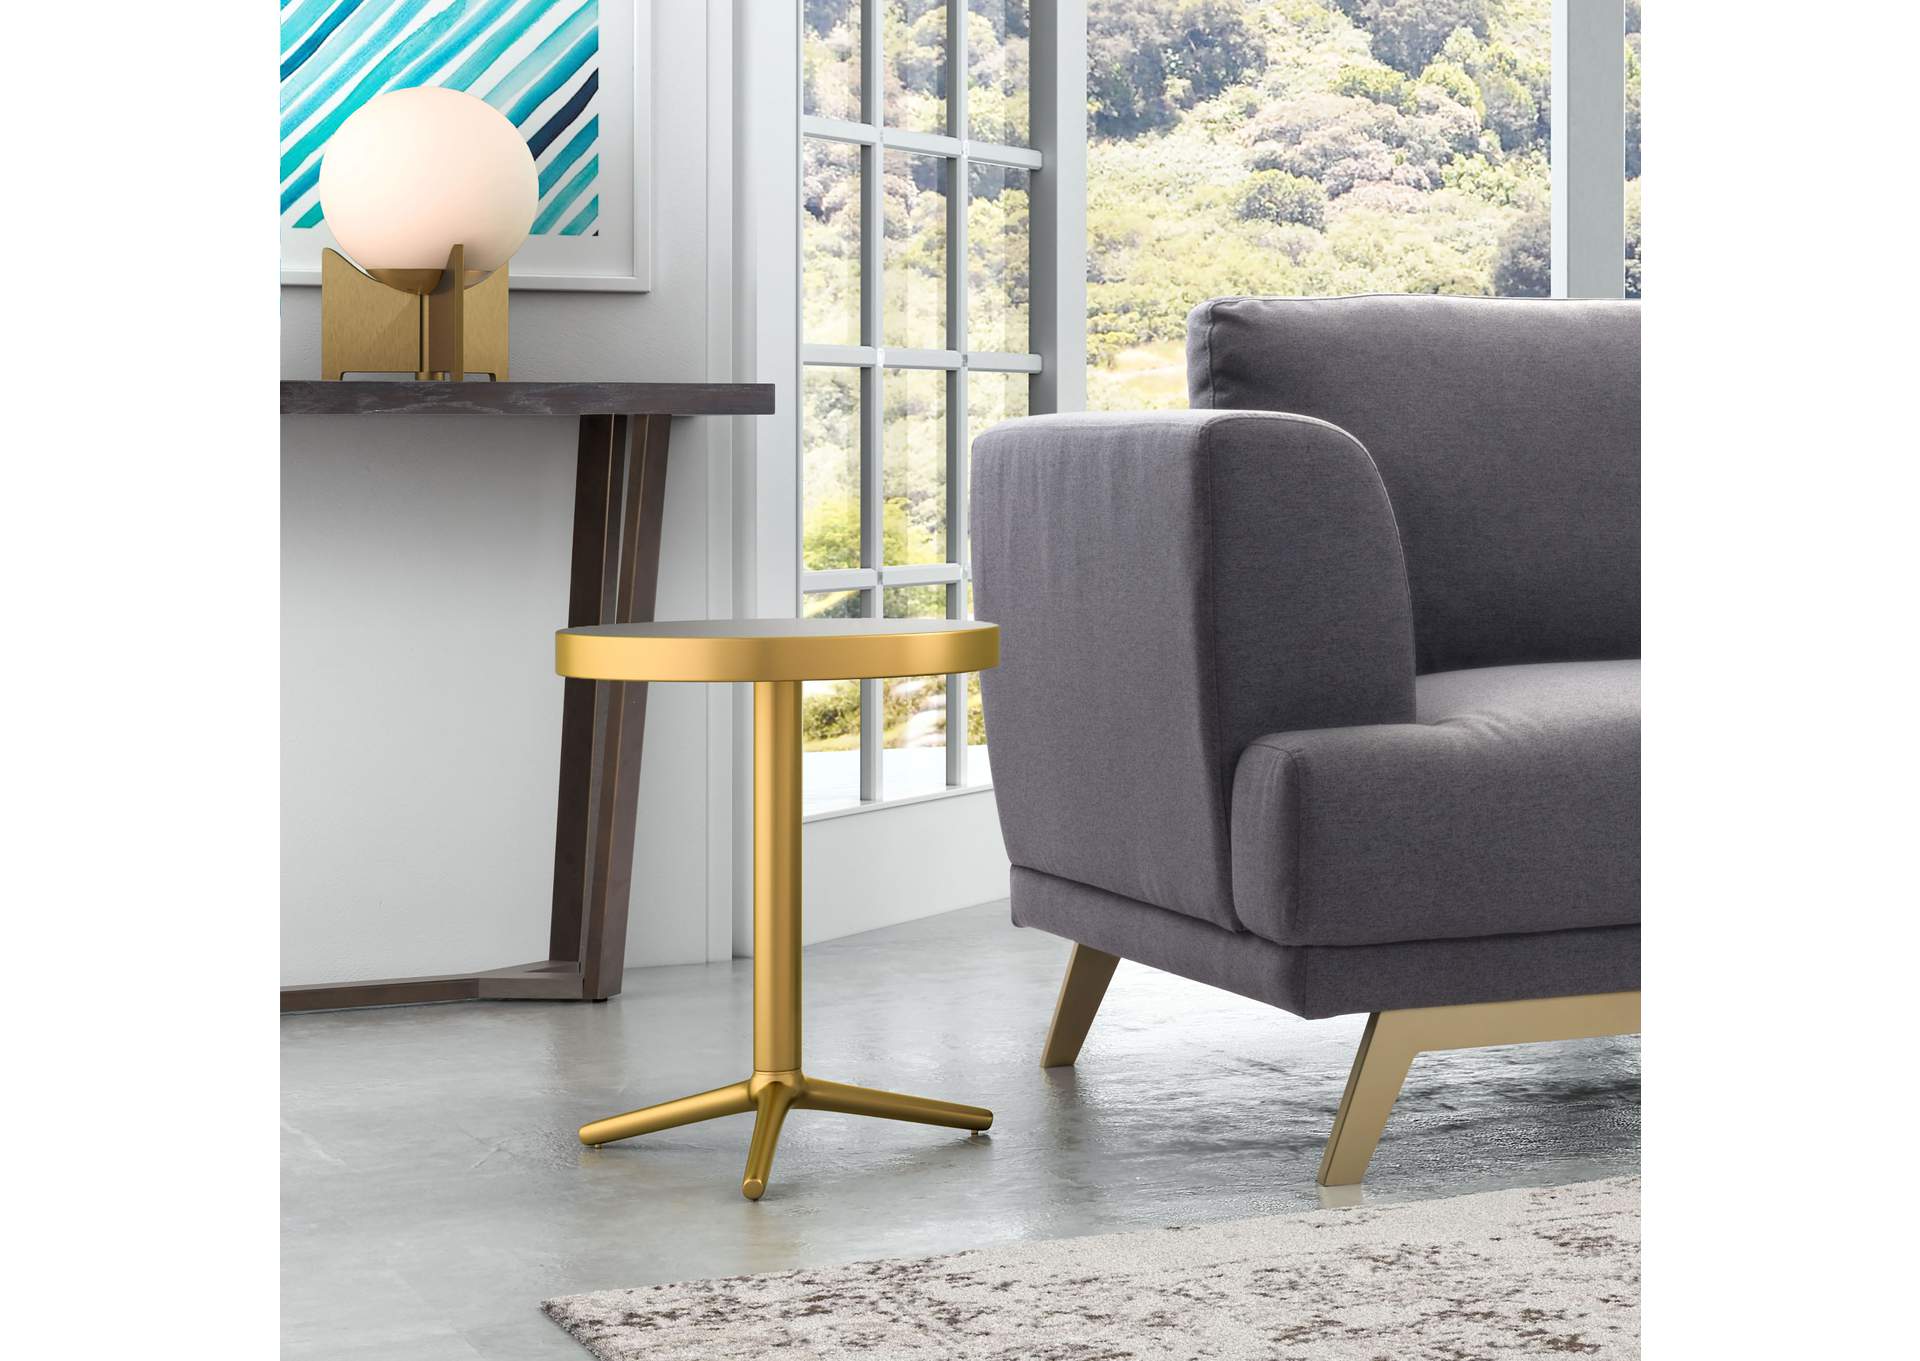 Derby Accent Table Gold,Zuo